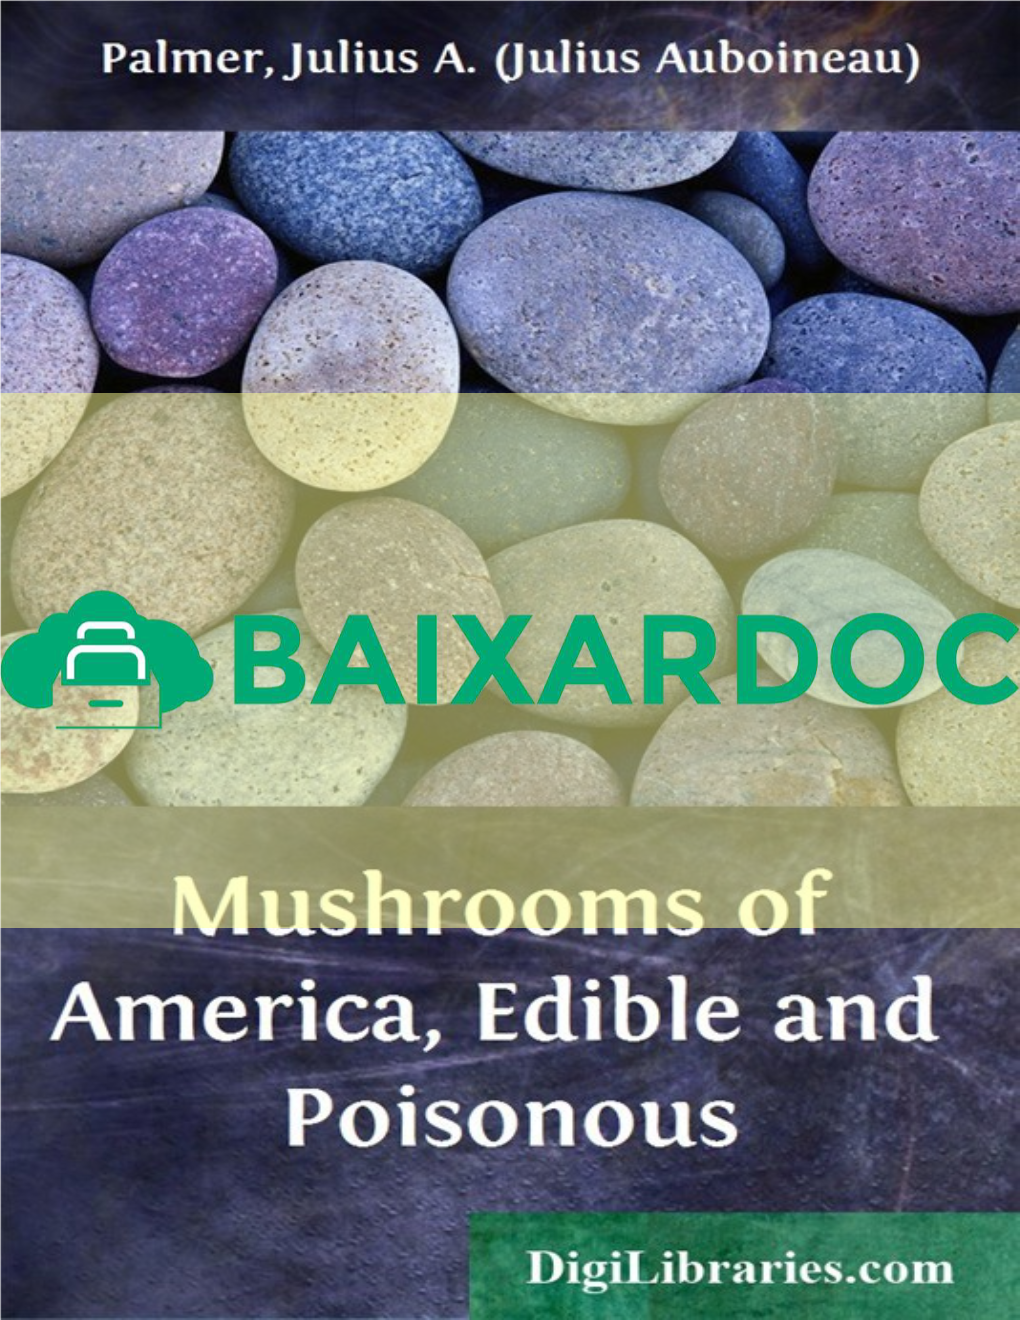 Mushrooms of America Edible and Poisonous